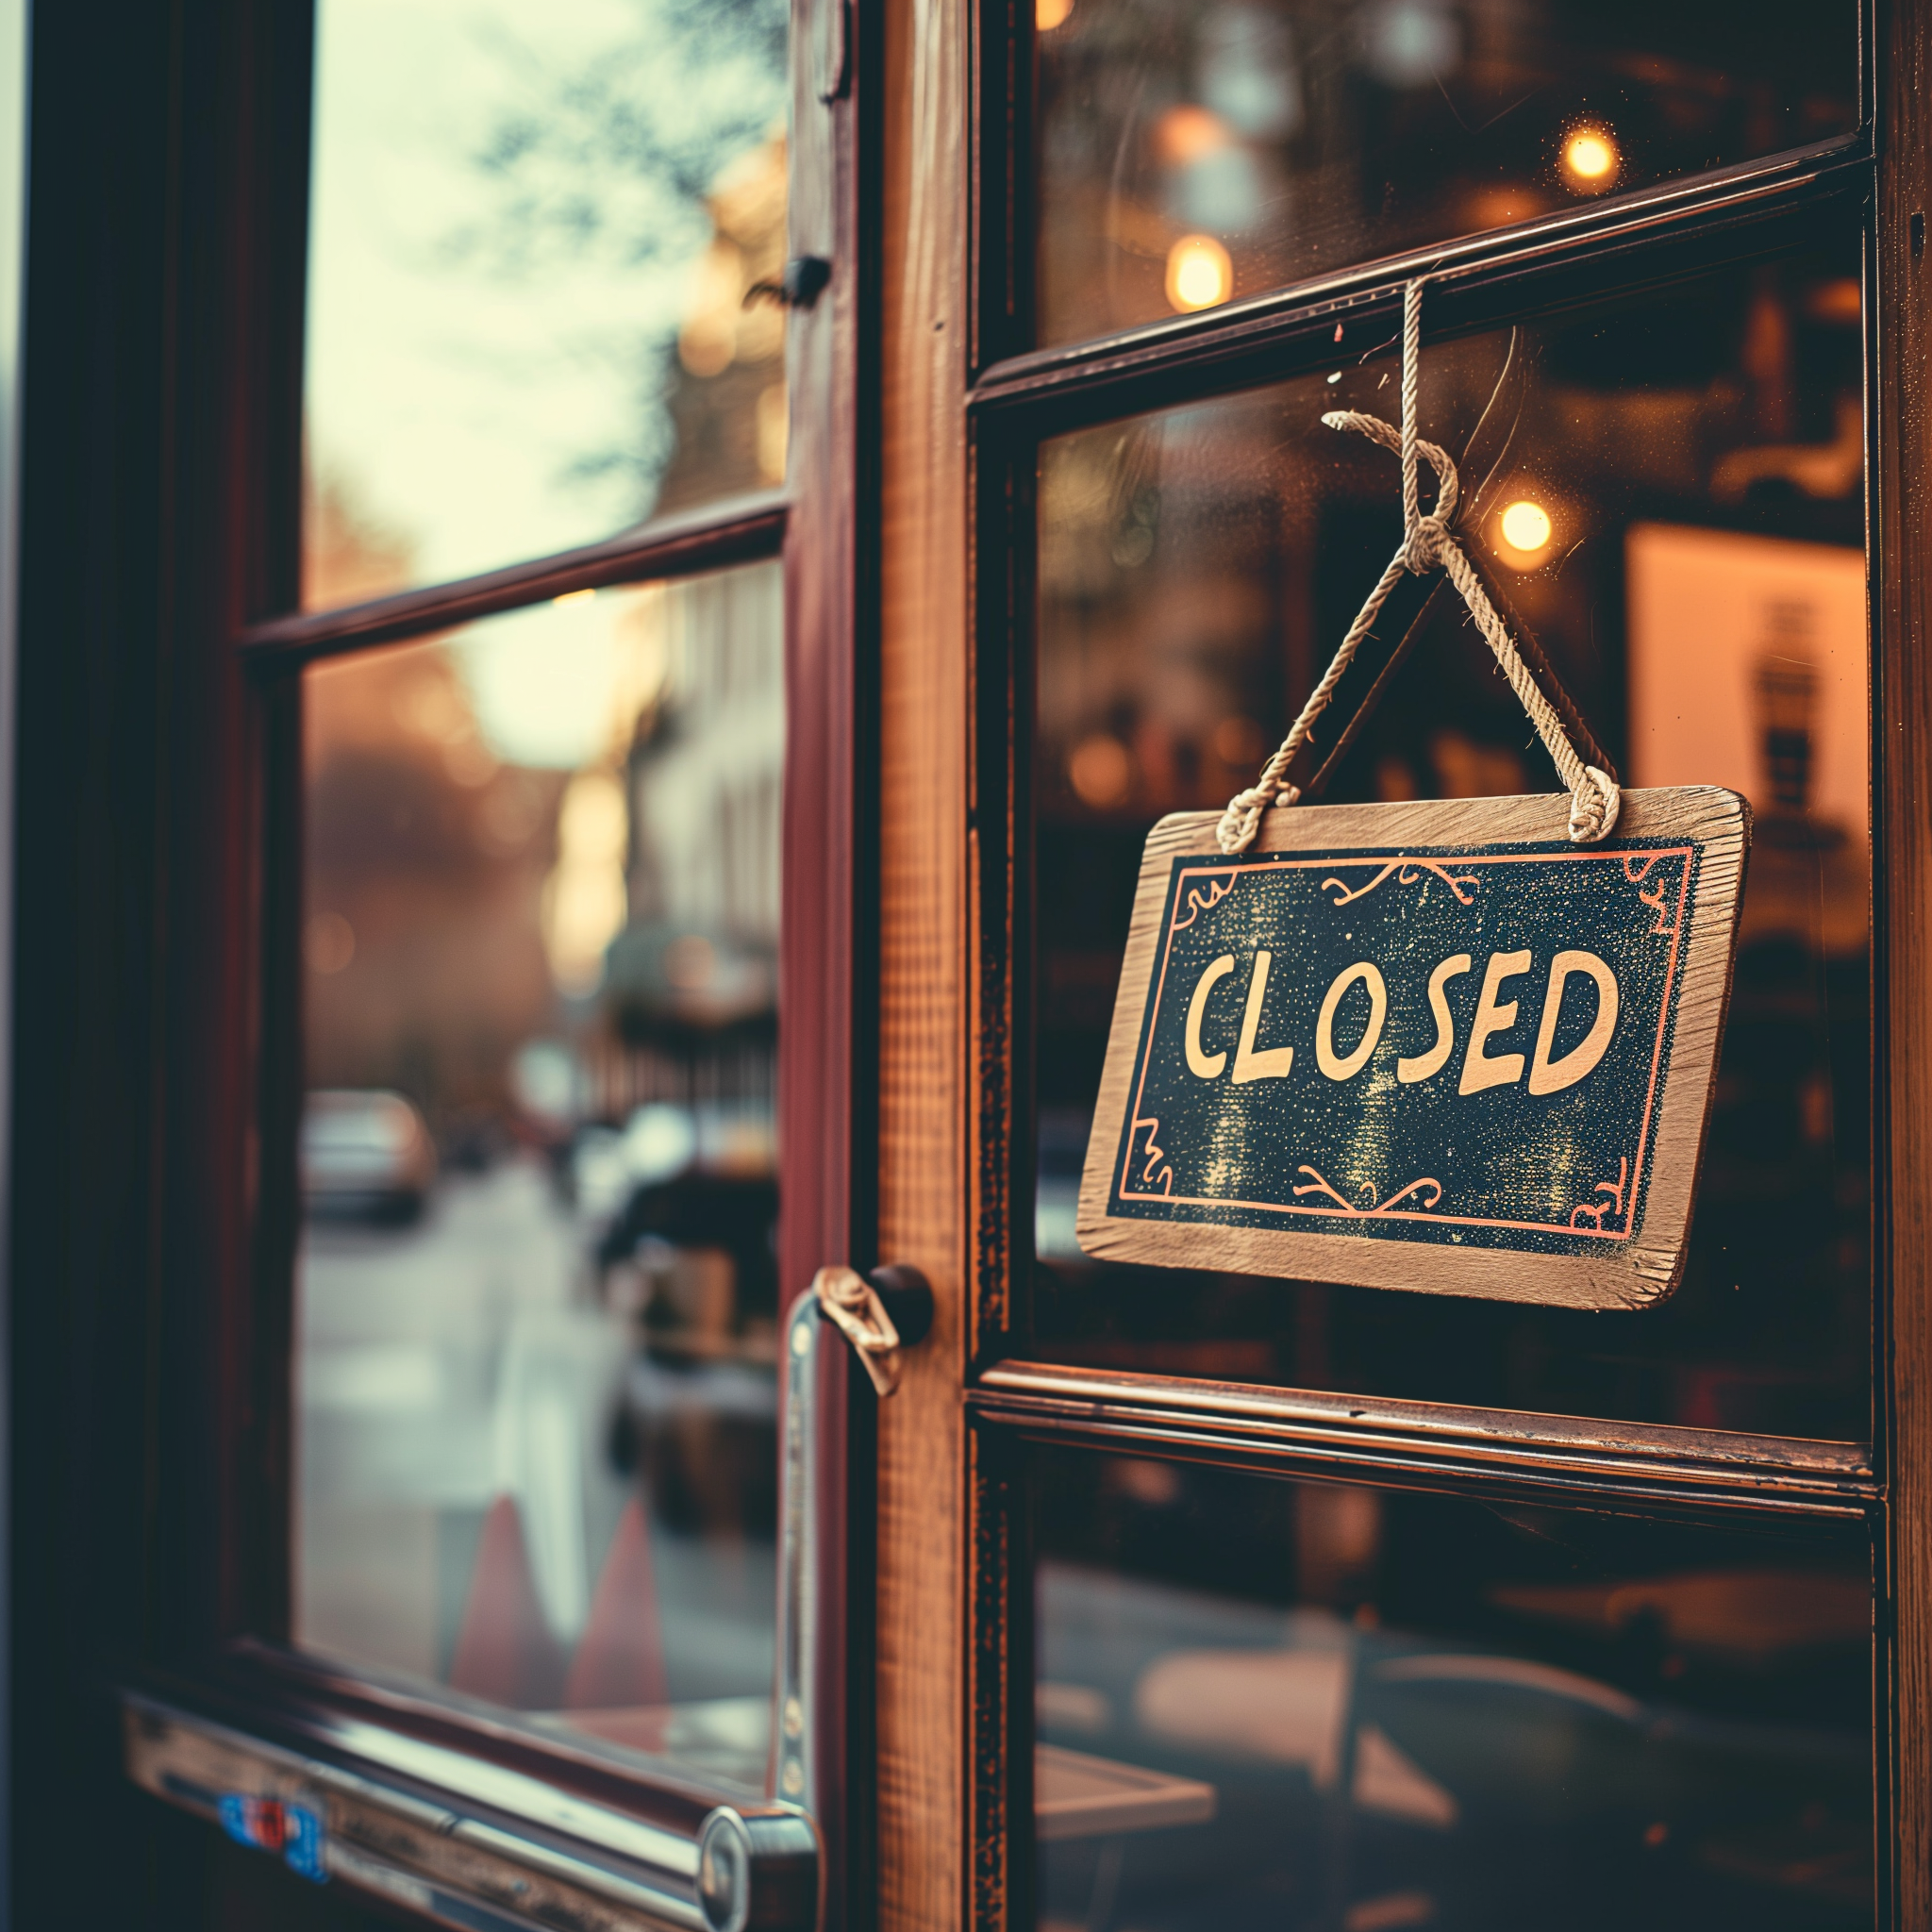 a sign that says "CLOSED" hanging on a glass window of a coffee shop